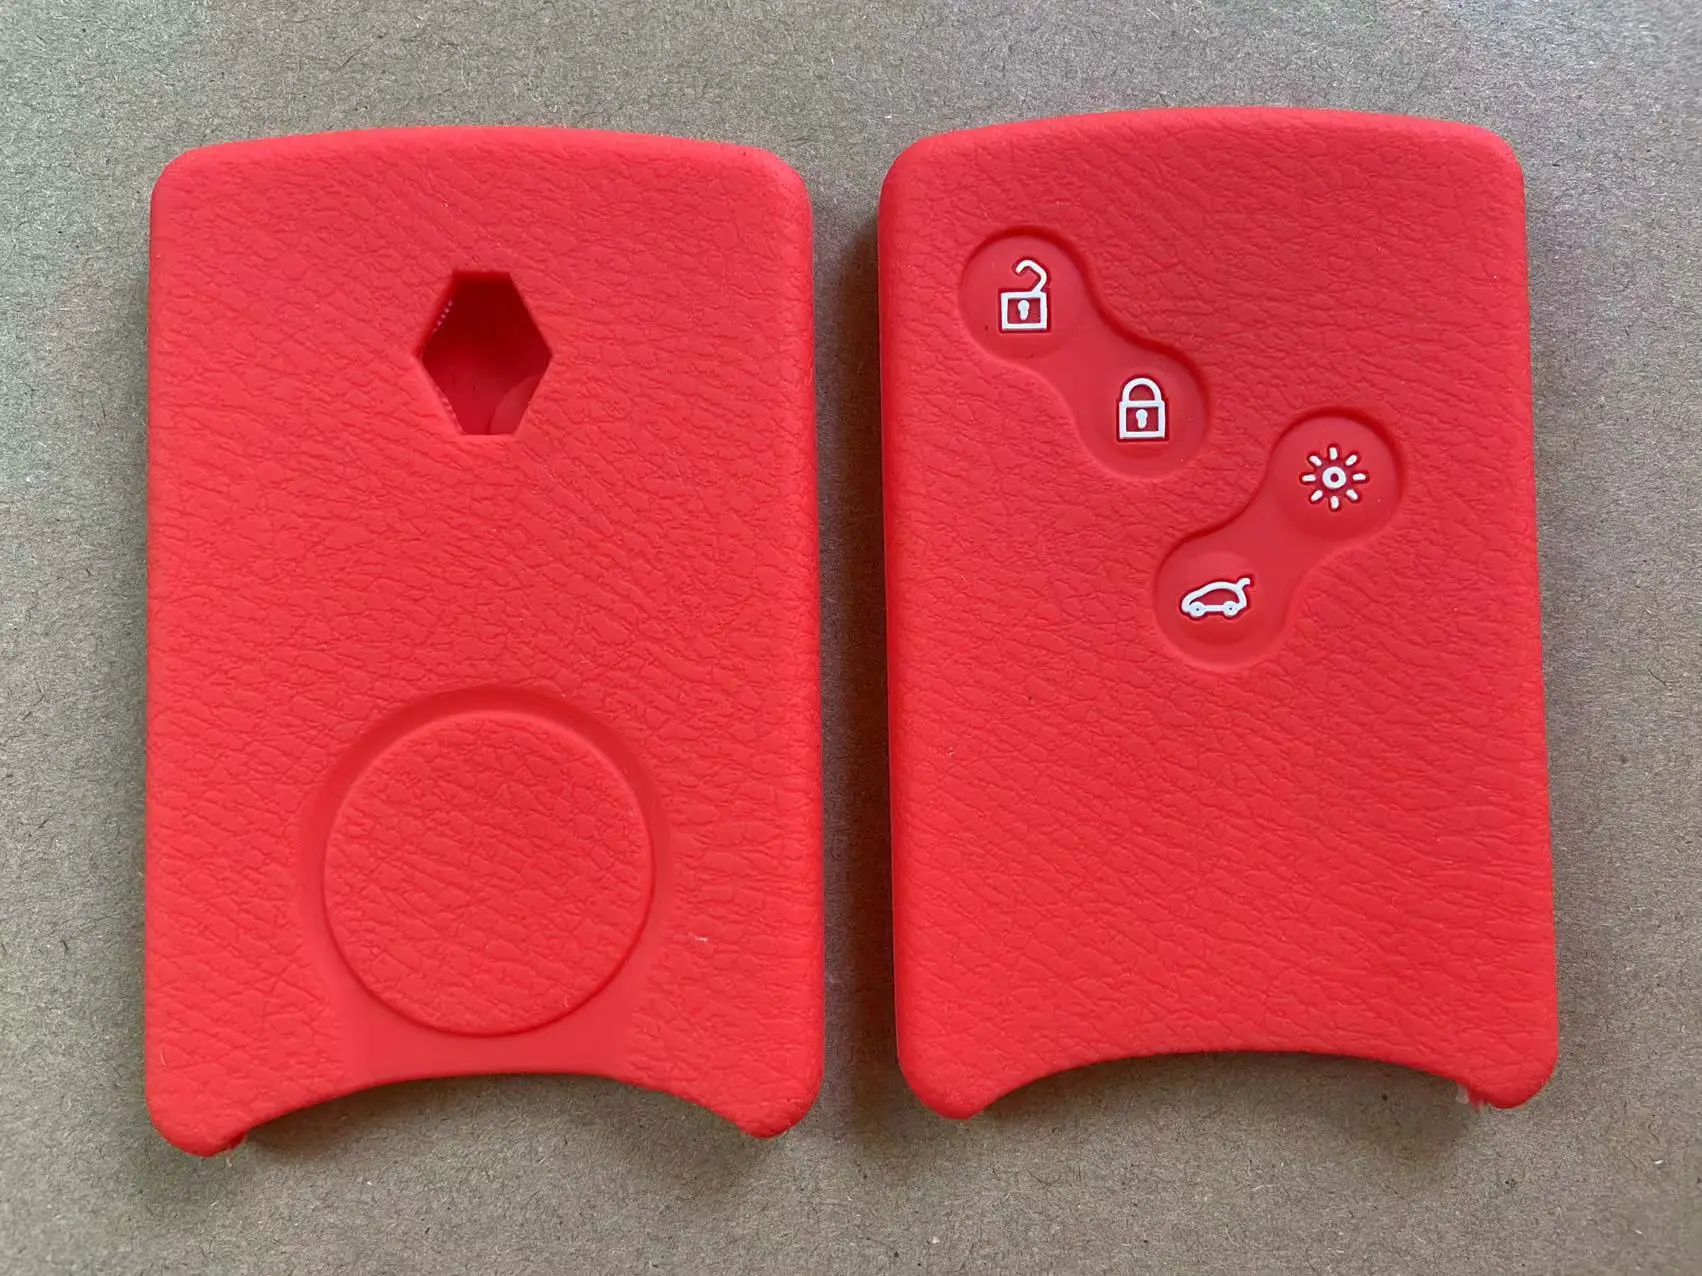 Red Silicone Case Cover For Renault Laguna Megane Koleos Remote Key Card RE4CRE 